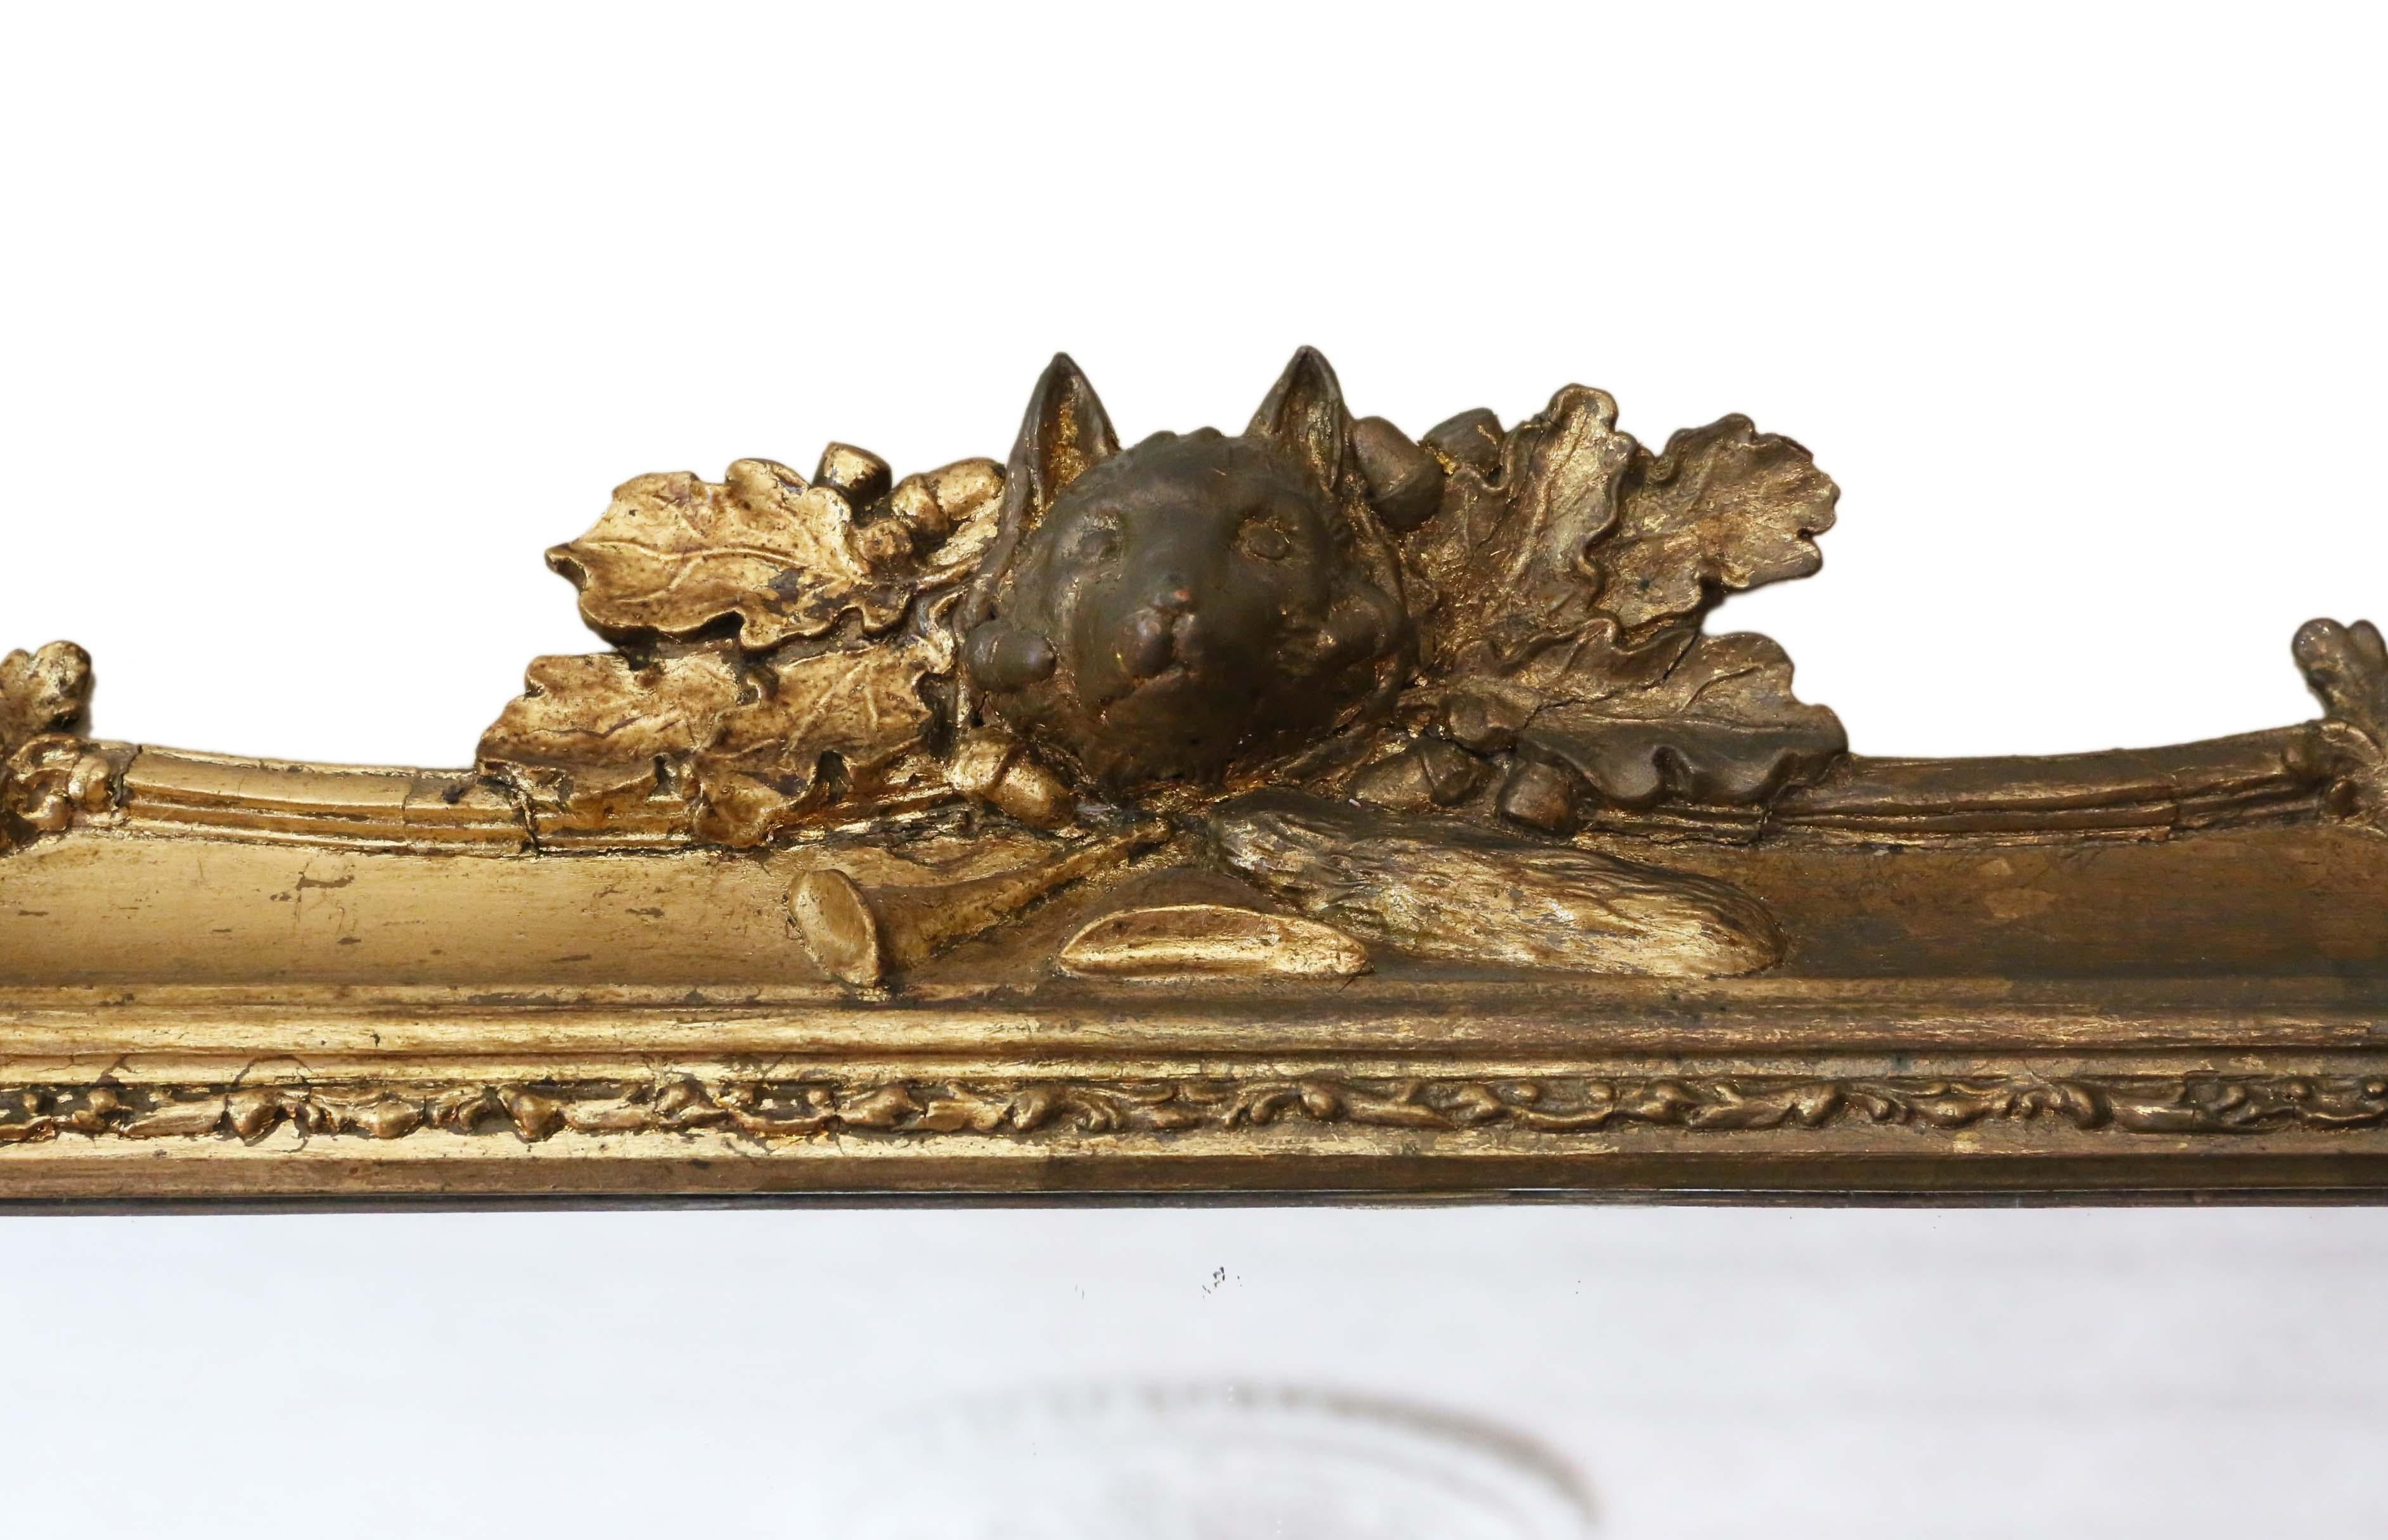 Antique large fine quality gilt wall mirror or overmantle 19th Century, with a Fox hunting theme. Lovely charm and elegance.

An impressive rare find, that would look amazing in the right location. No loose joints or woodworm.

The mirrored